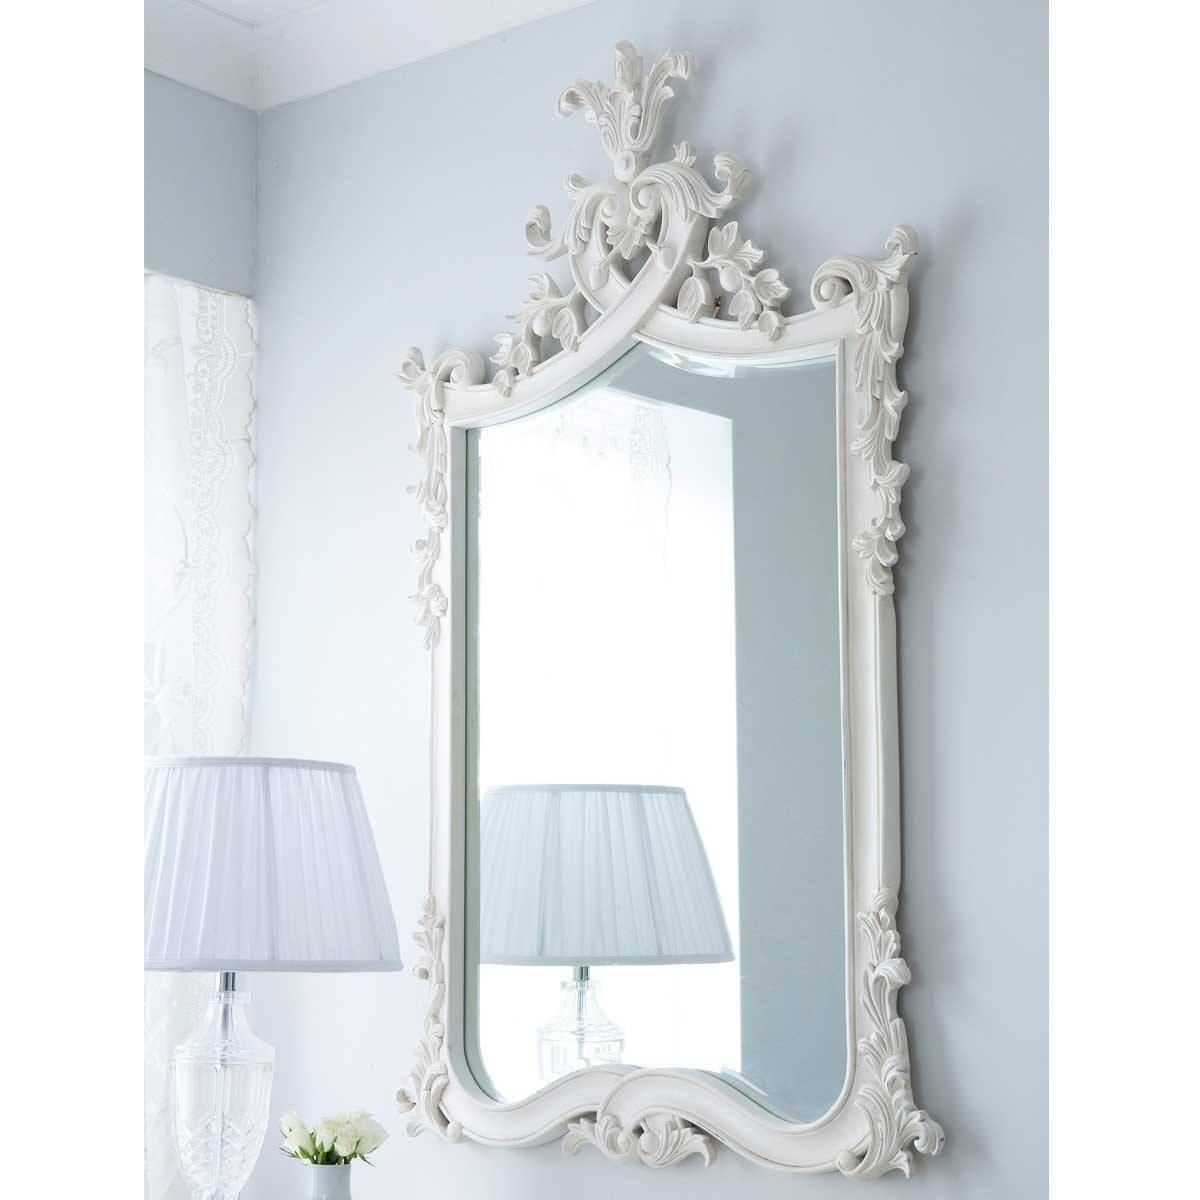 Provencal Heart Top White Mirror | Luxury Mirror Intended For French Wall Mirrors (View 2 of 20)